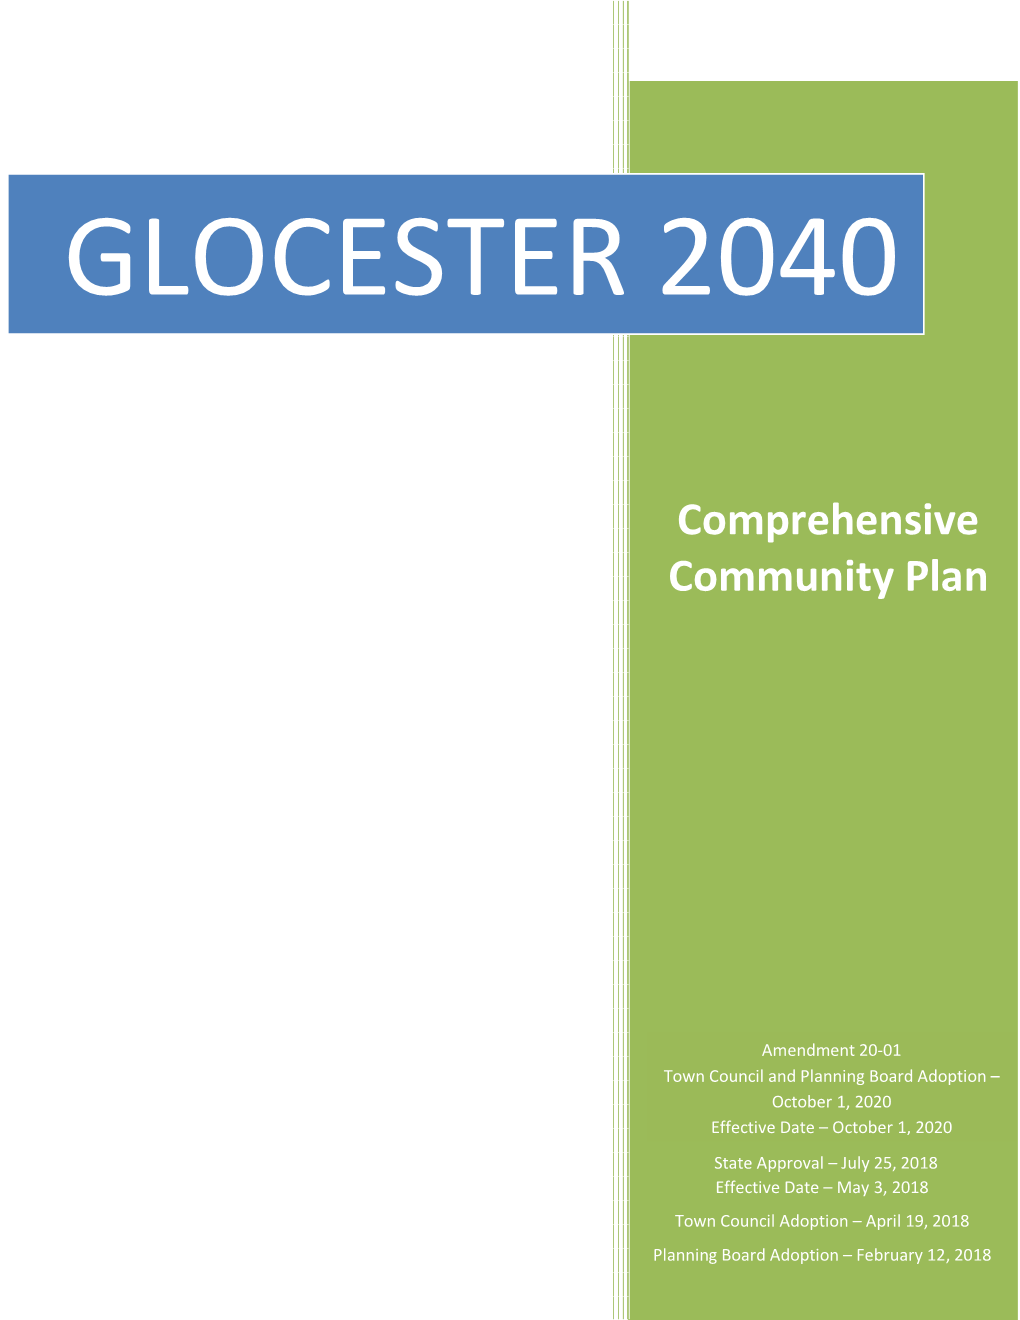 Comprehensive Plan Is a Document That Sets the Vision of the Community by Outlining Long Range Goals and Accompanying Policies and Actions to Achieve Them